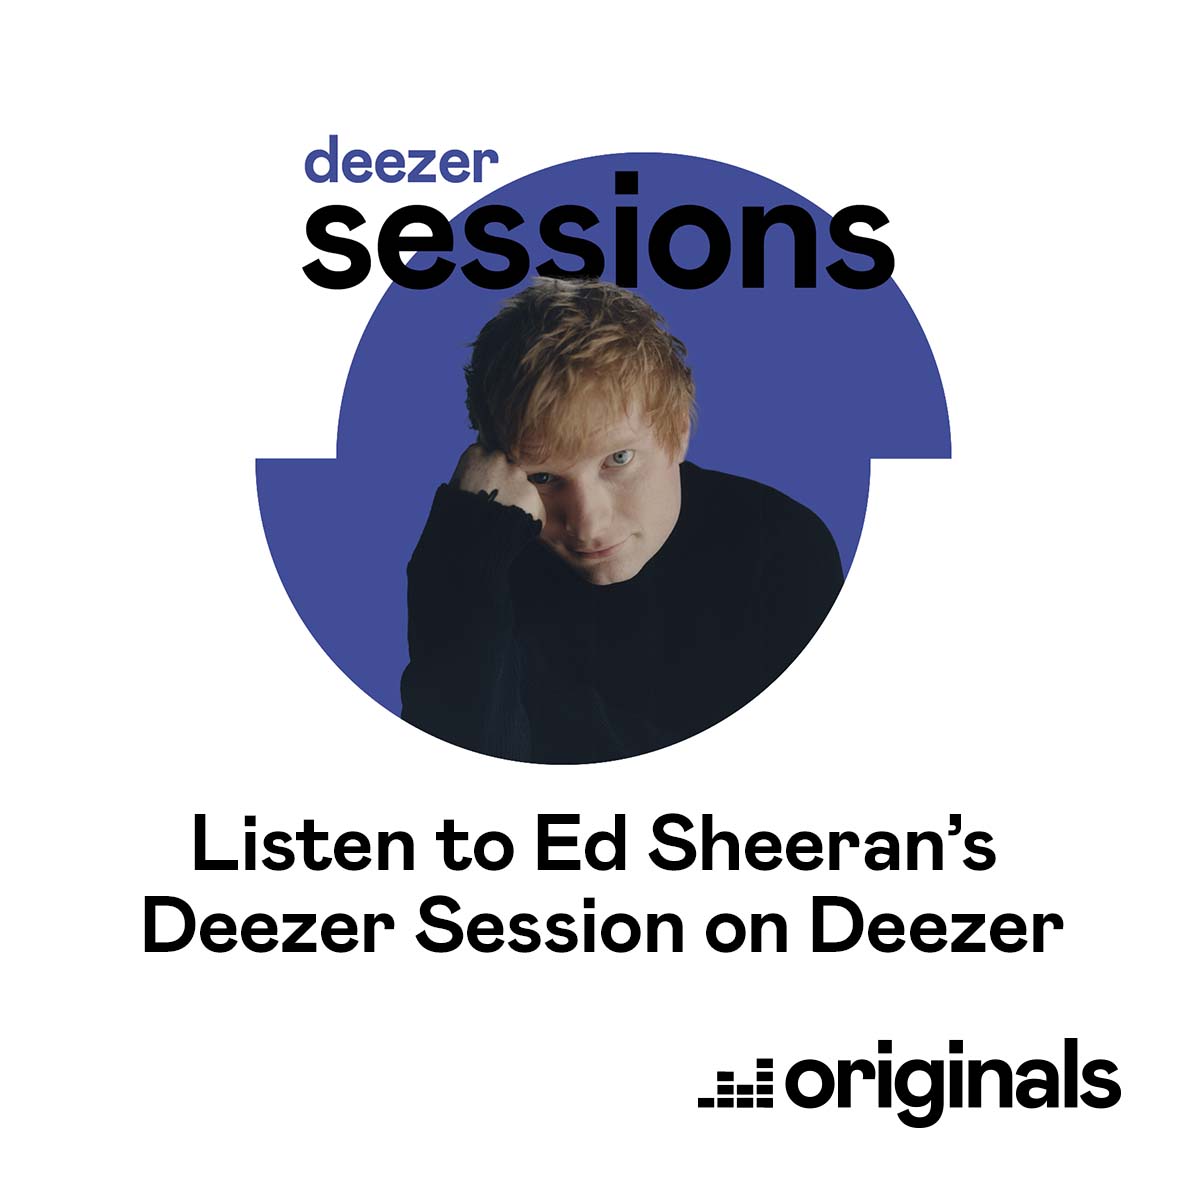 New Ed Sheeran acoustic EP is a Deezer music exclusive – is that a bad thing?